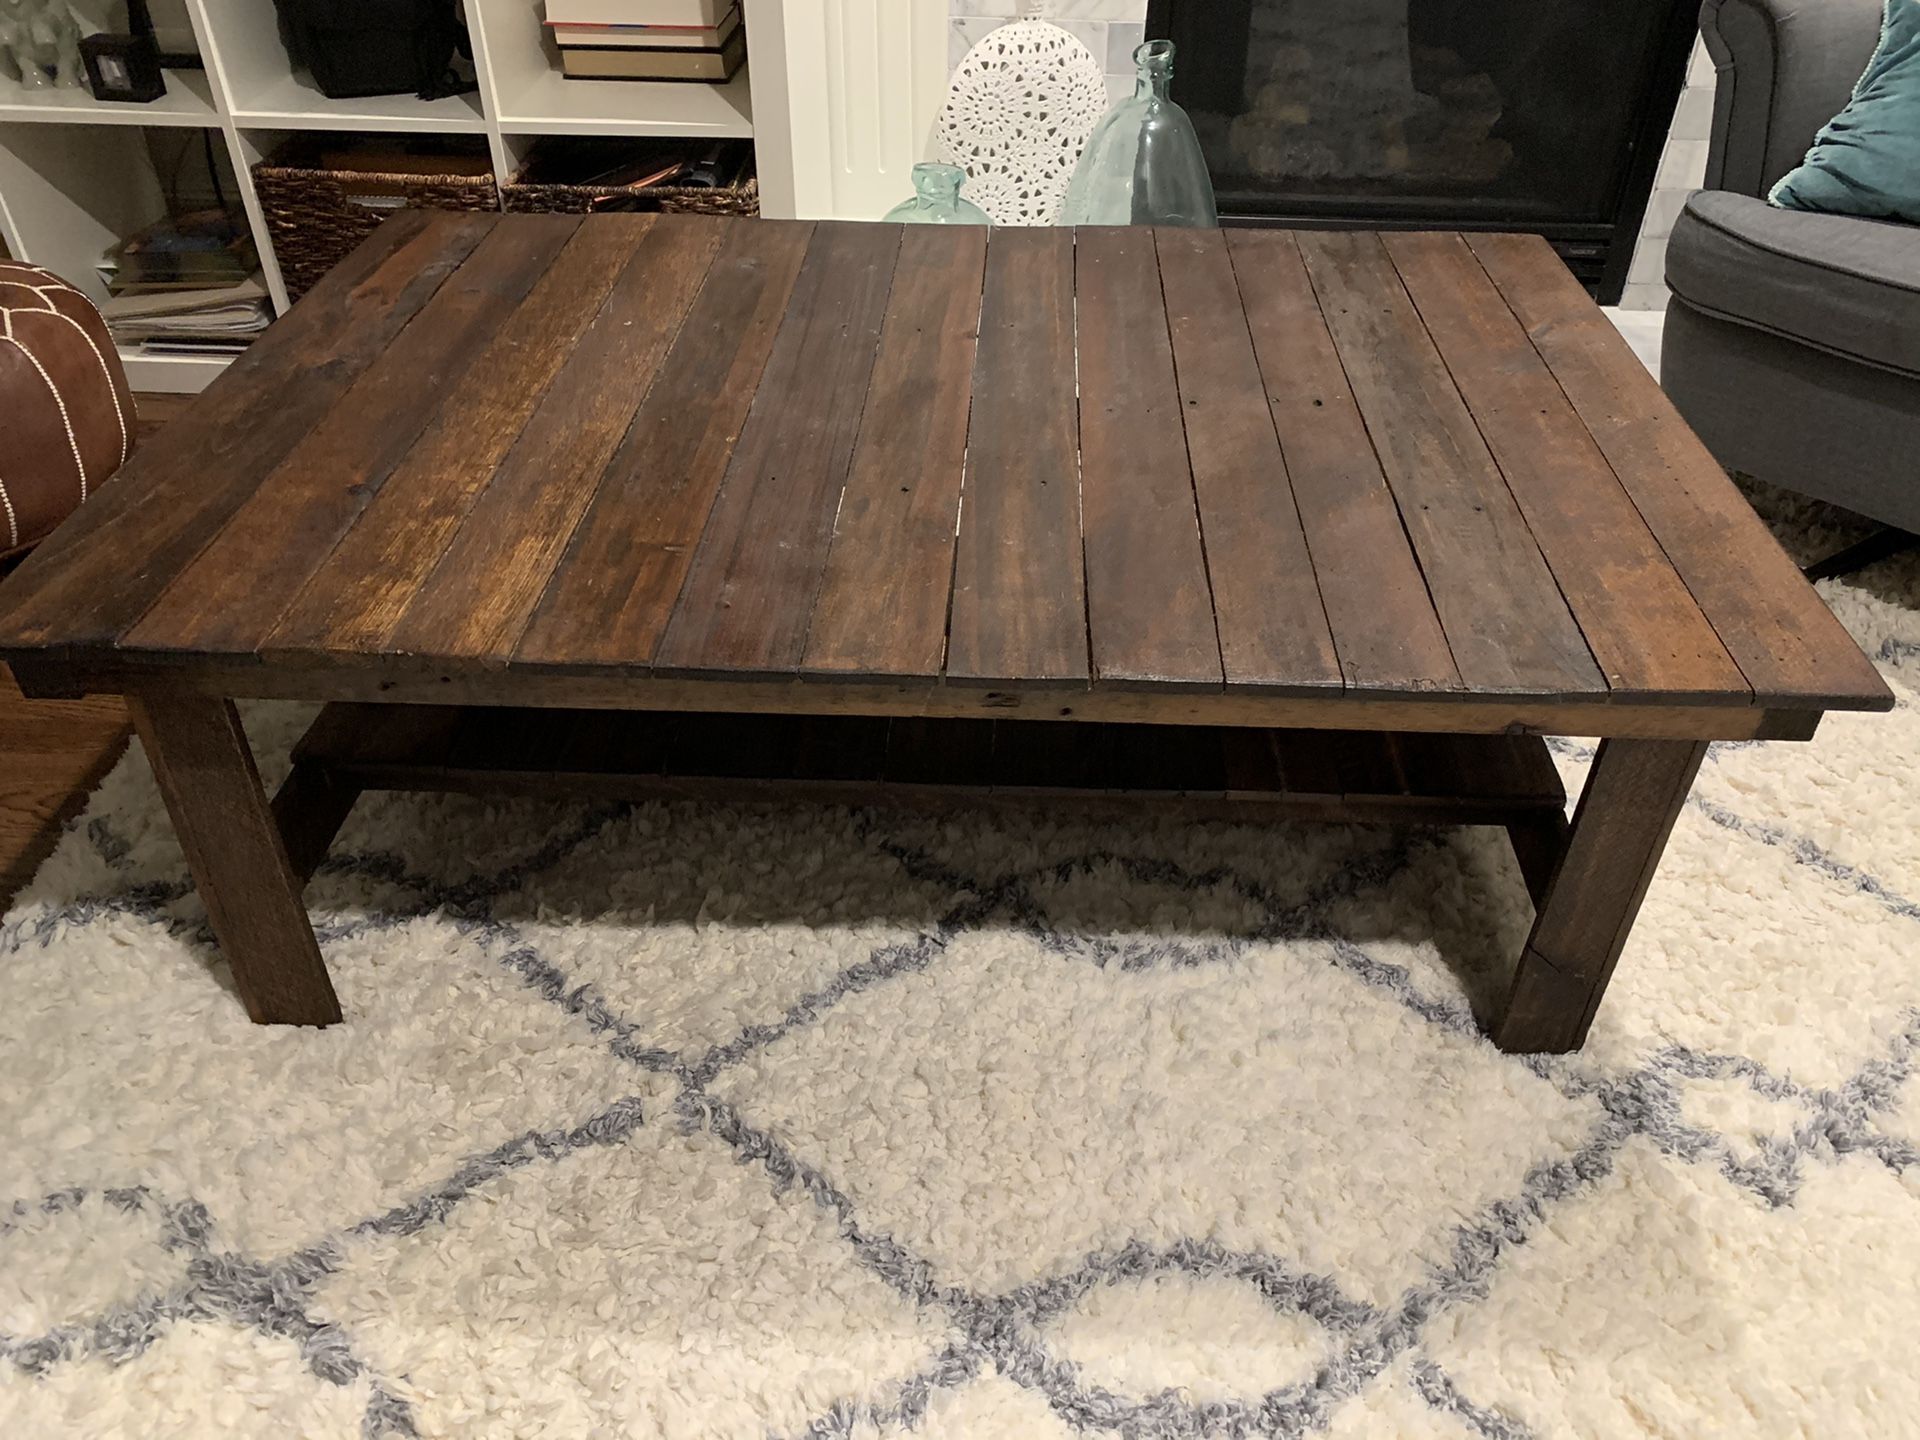 Rustic coffee table with two end tables